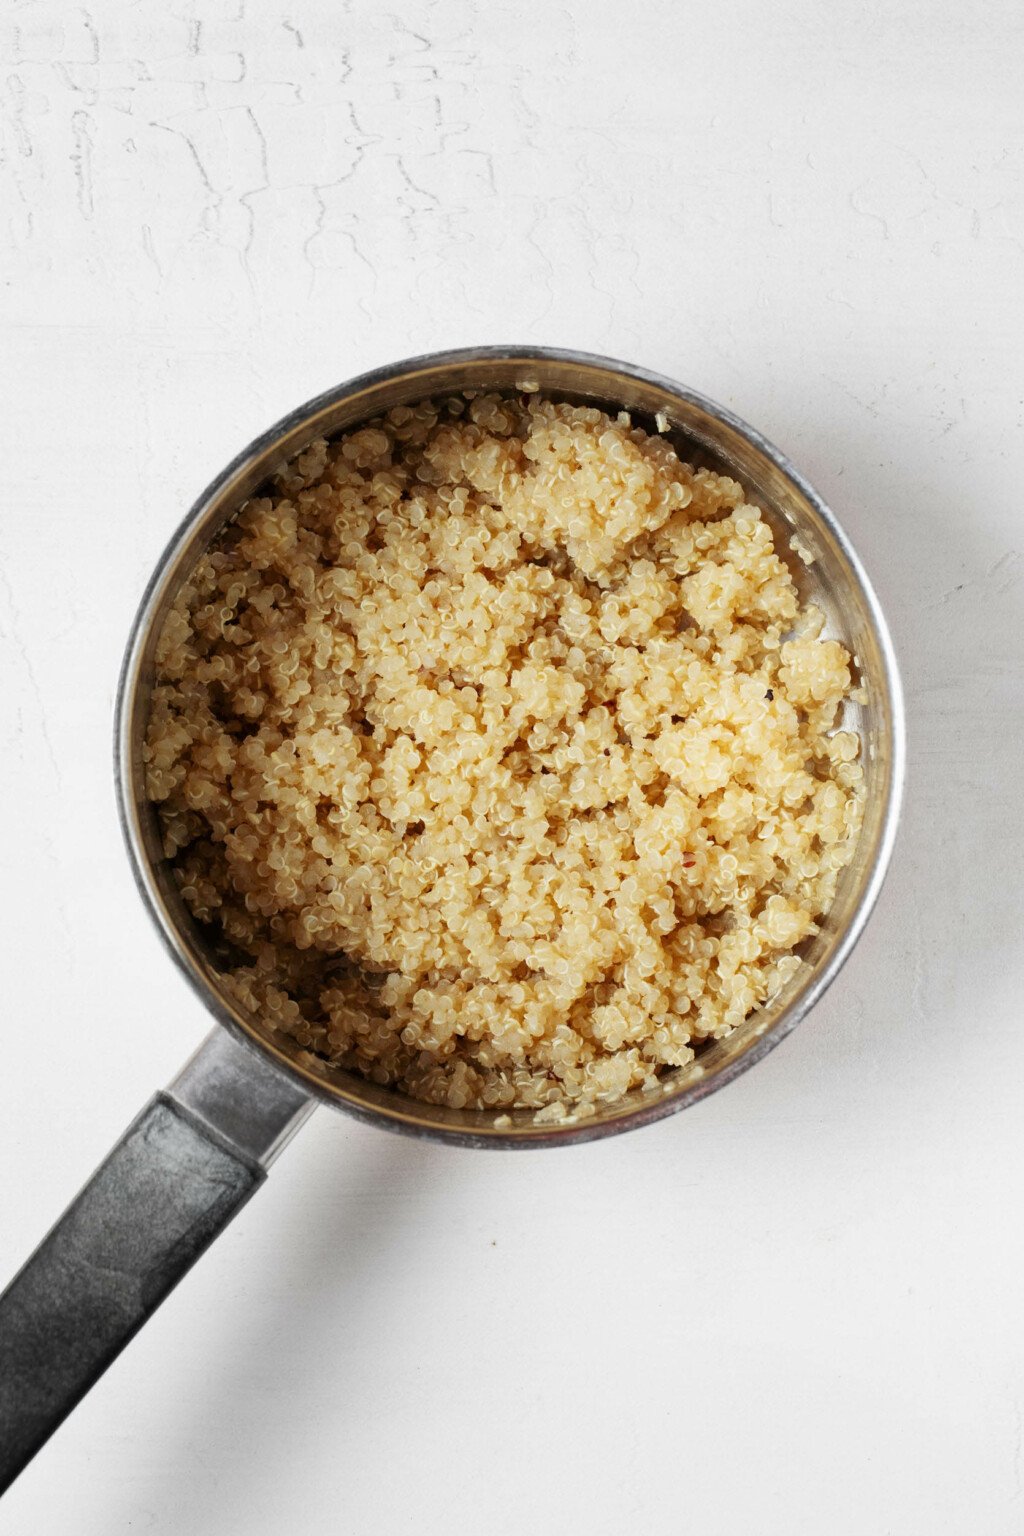 An overhead image of a silver saucepan, which is filled with fluffy, cooked quinoa.